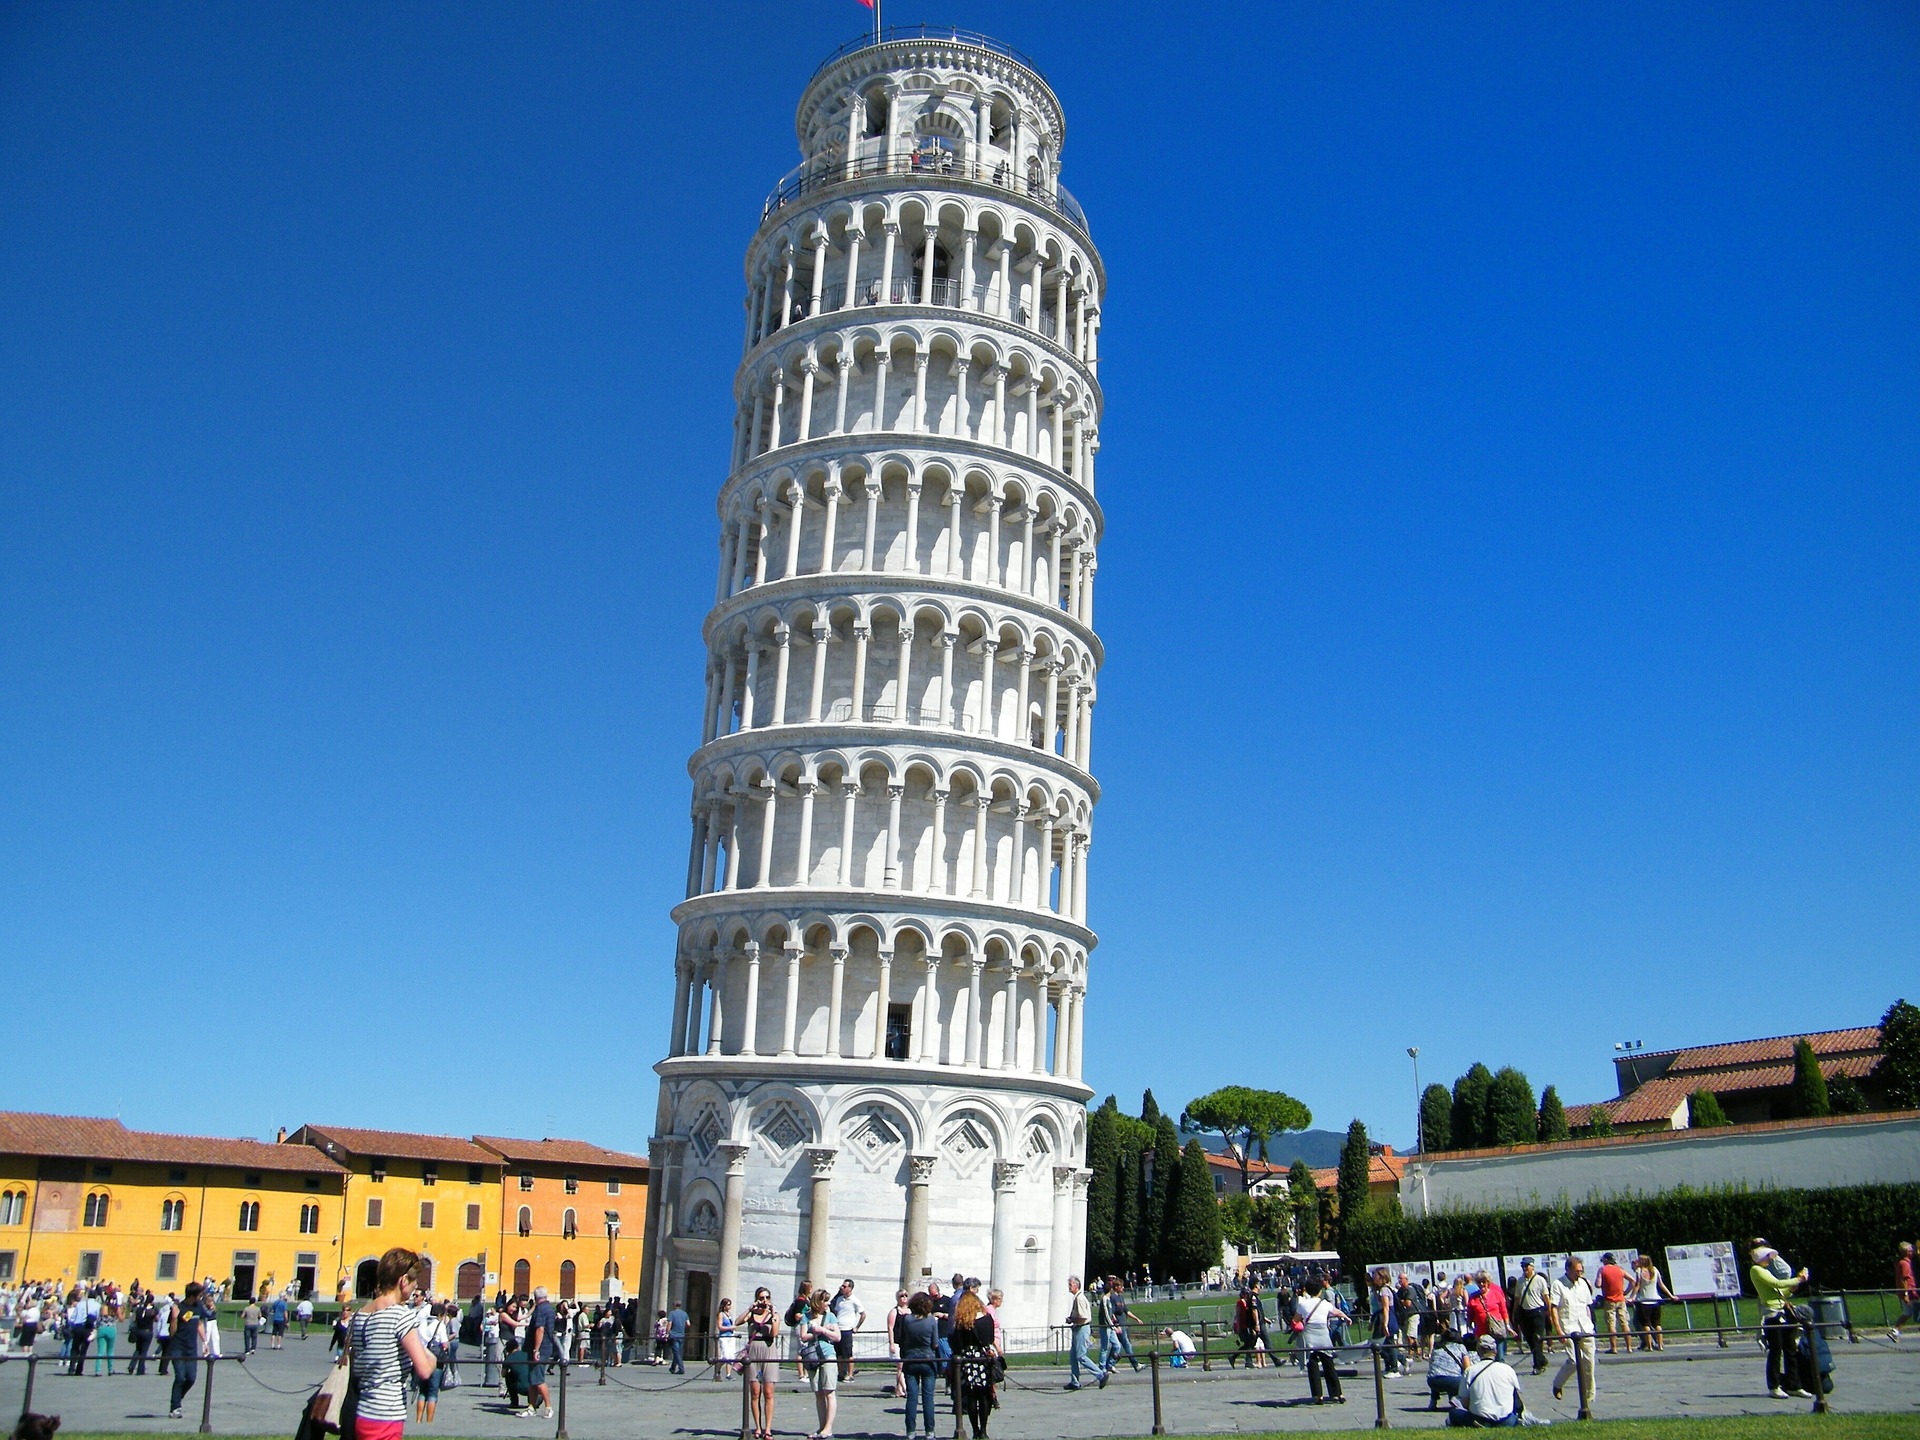 The Leaning Tower of Pisa stood up another 4 centimeters!